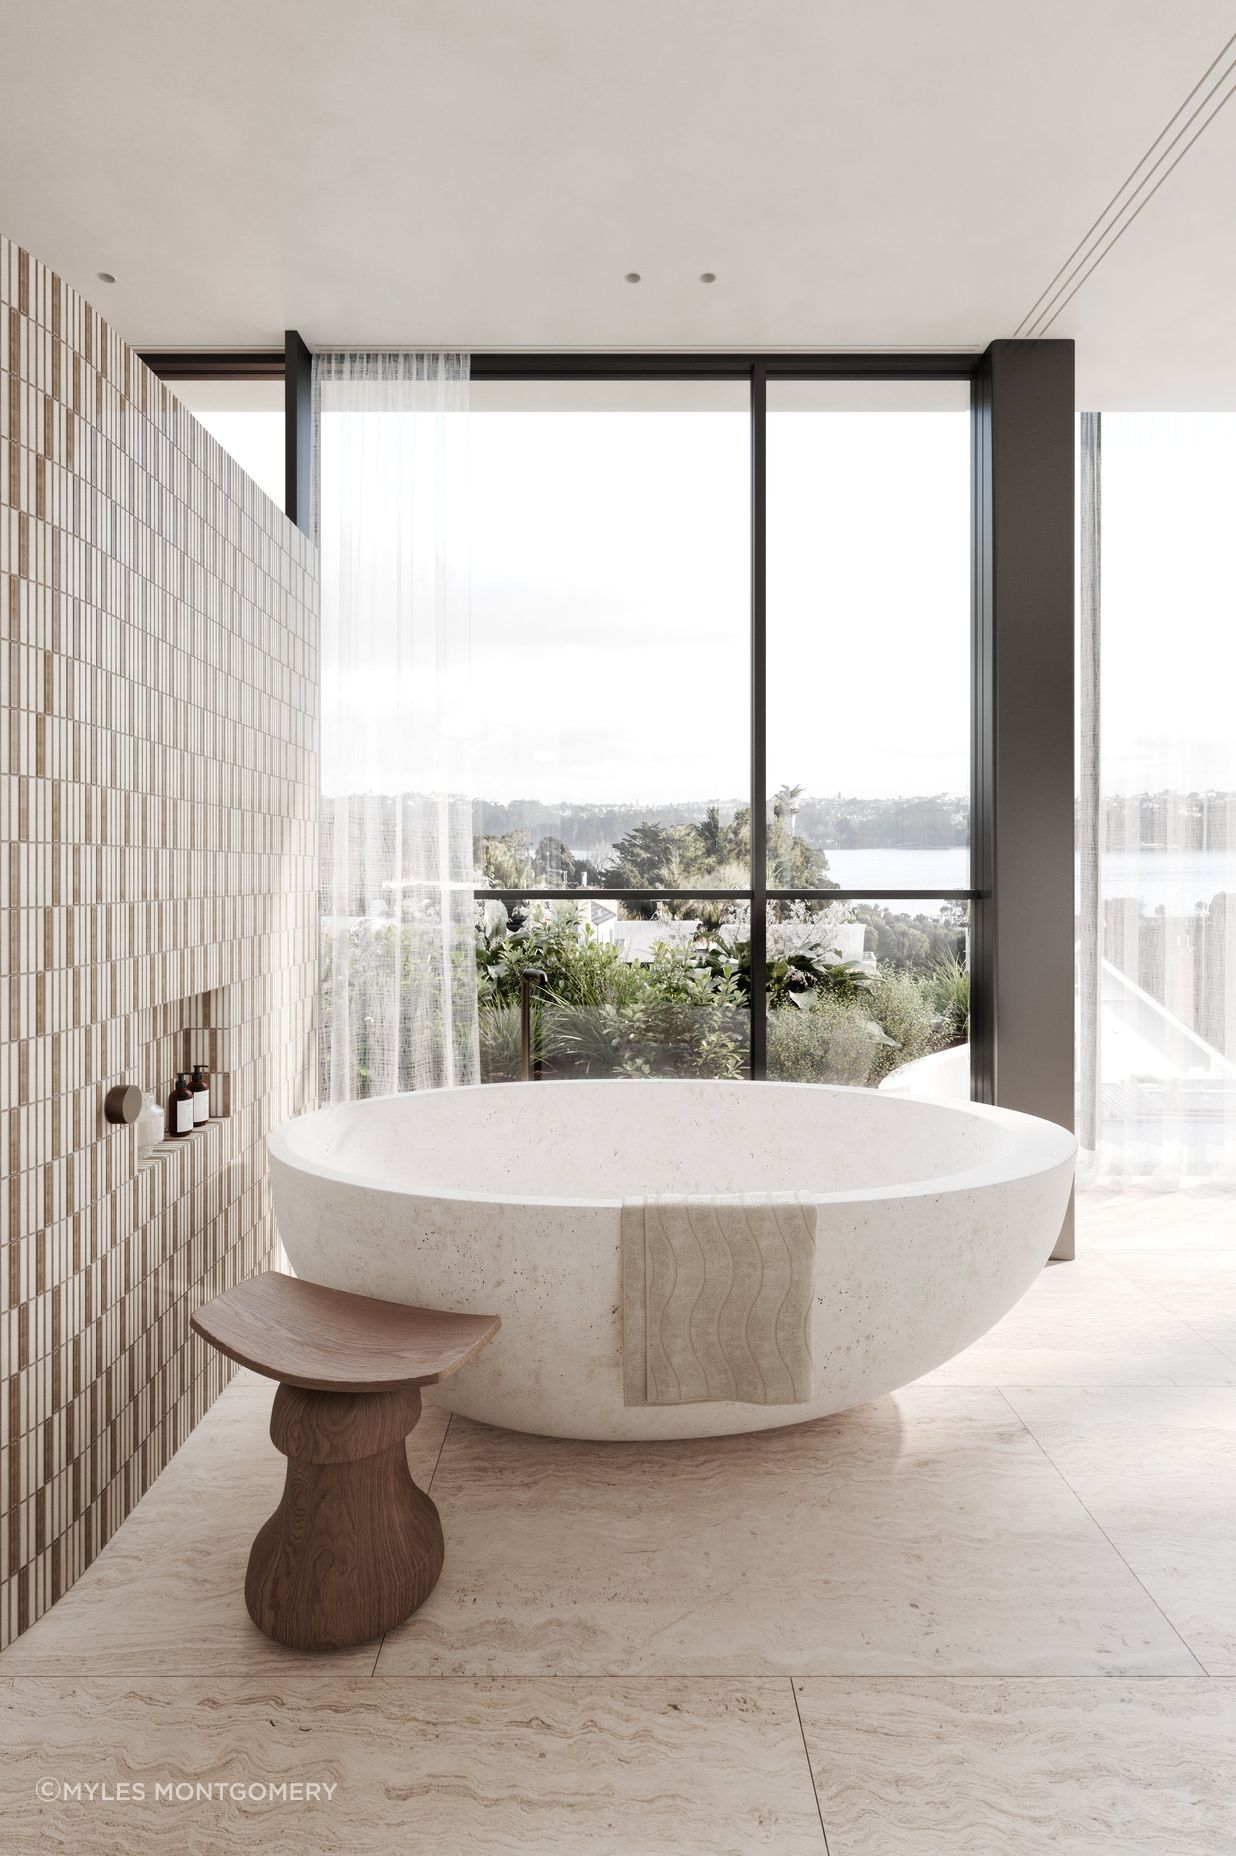 Indulgent ensuites featuring freestanding bathtubs and outdoor planting.